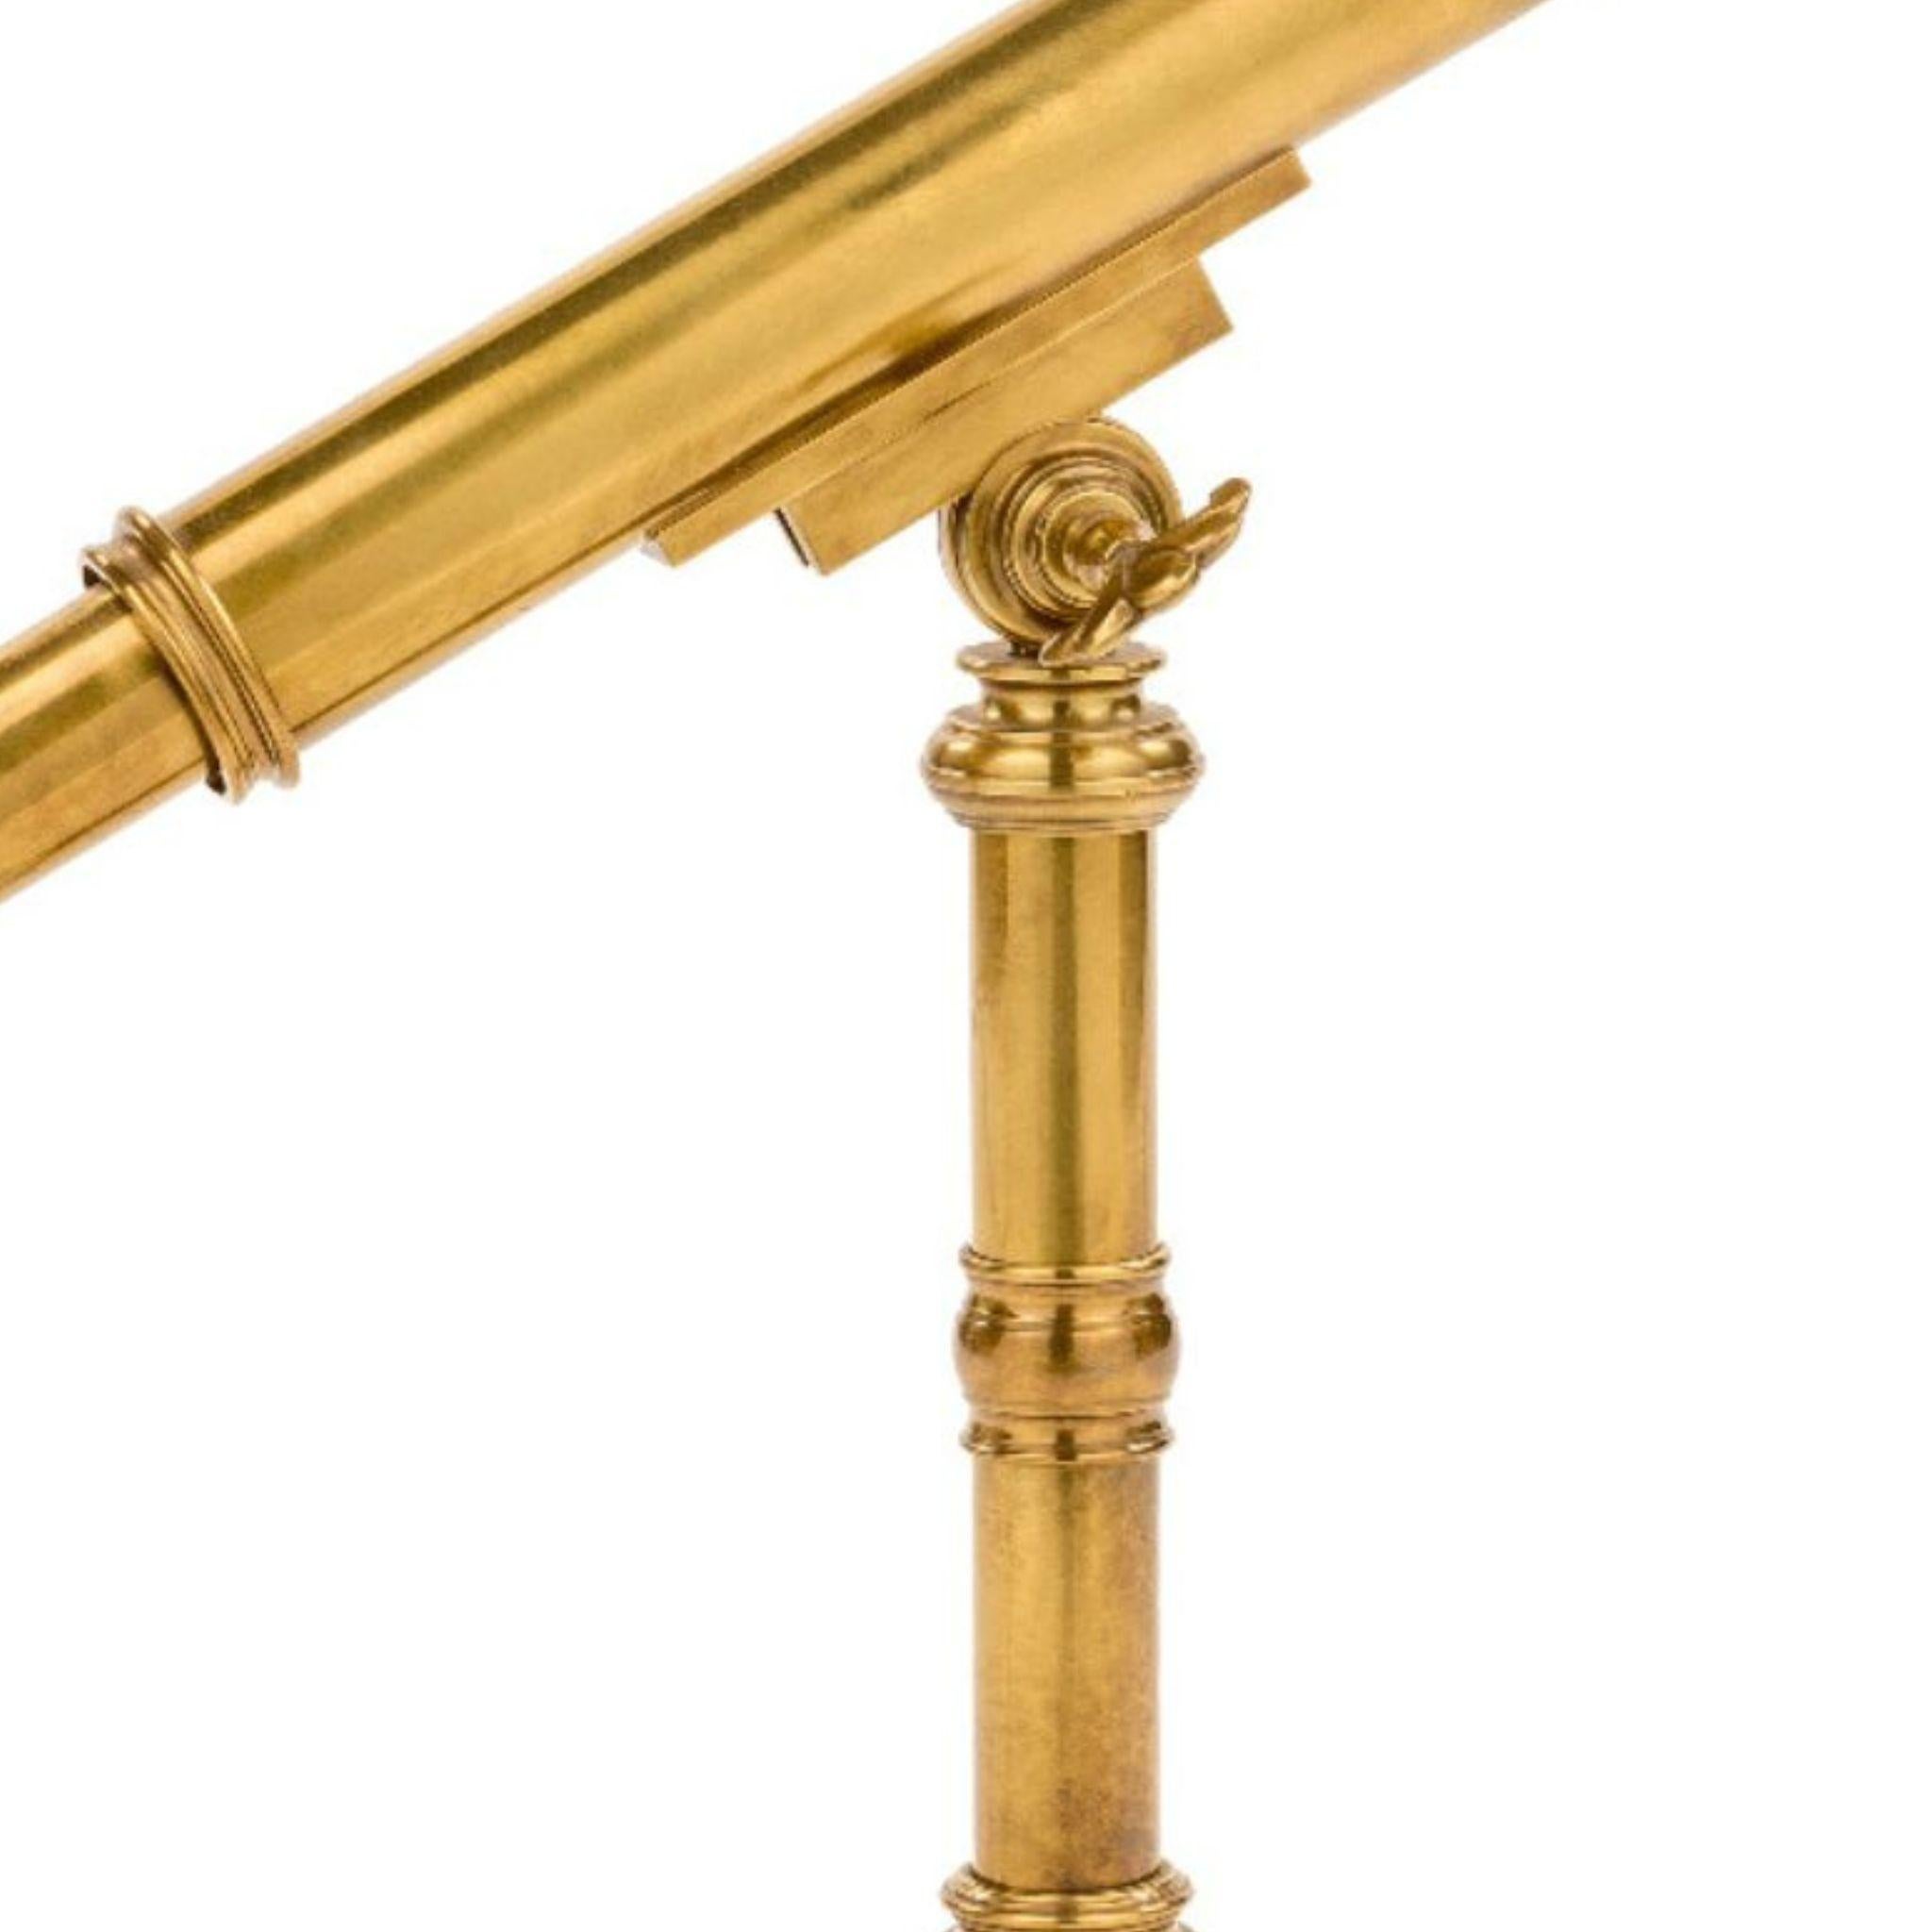 Get a glimpse into a world of elegance with our brass telescope. Beautifully crafted from high-quality brass, this telescope is the perfect addition to any nautical or coastal themed room. With its gleaming brass finish, it's not just functional but